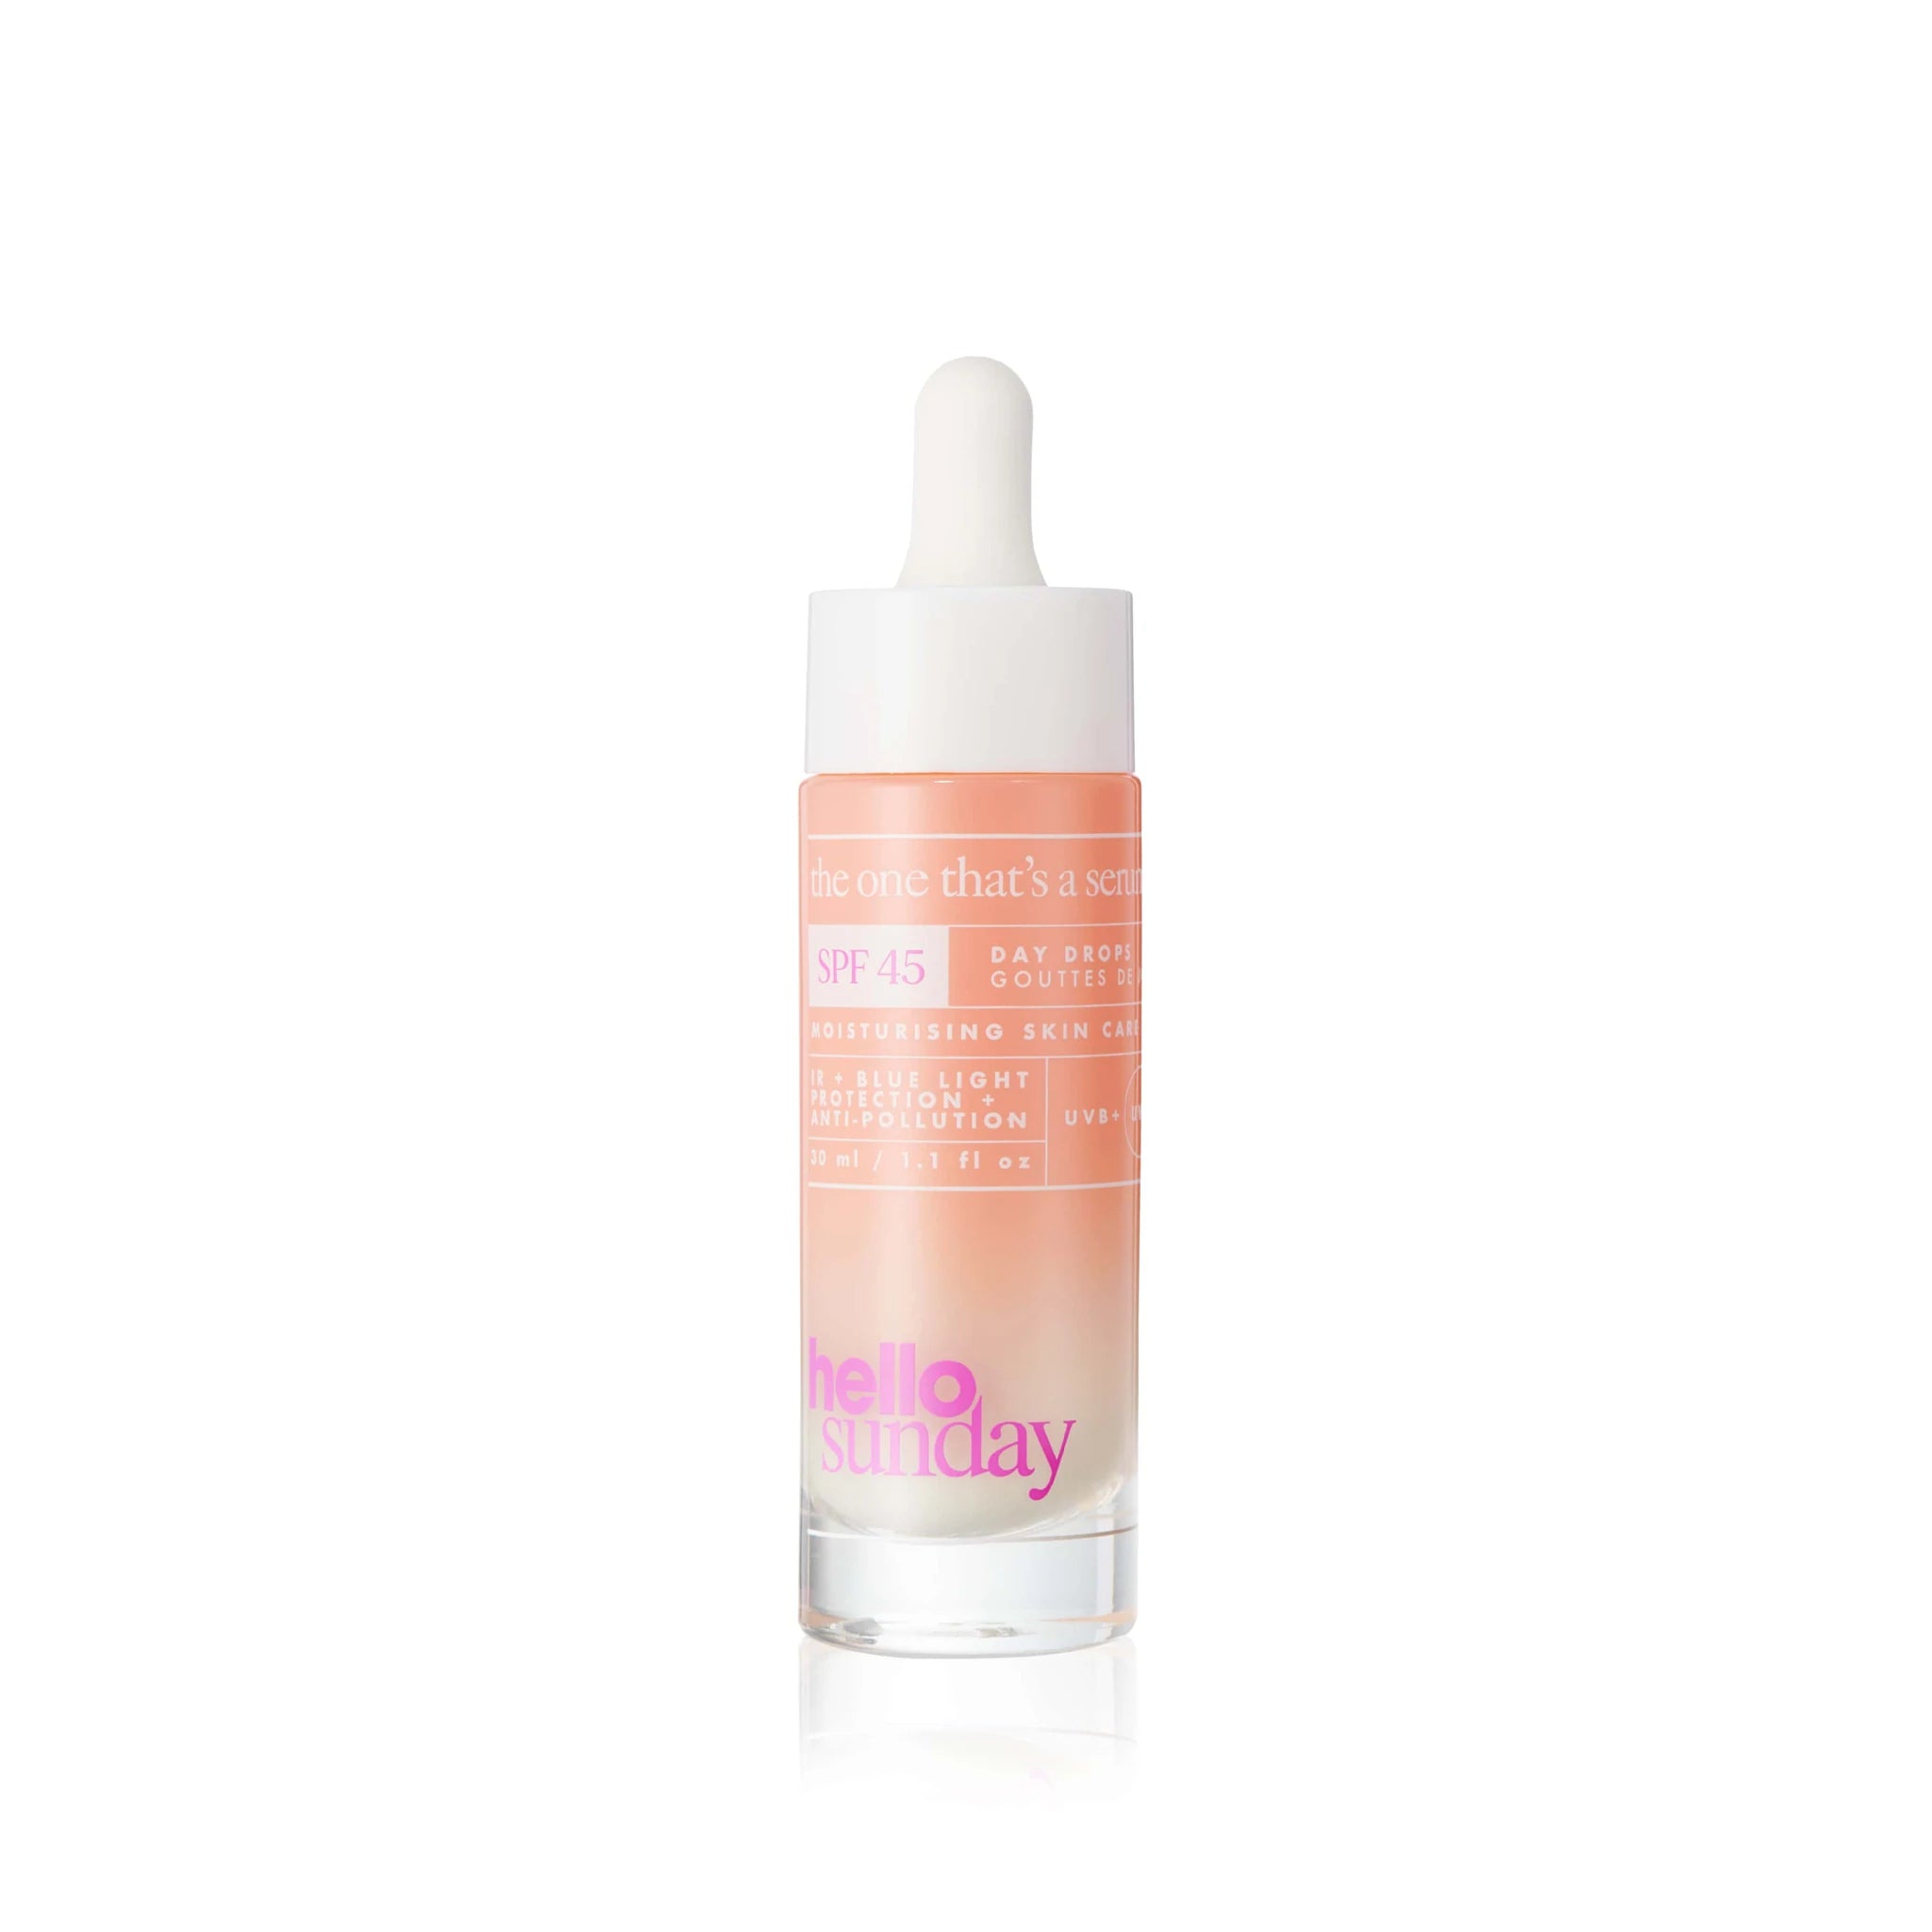 HELLO SUNDAY THE ONE THAT'S A SERUM FACE DROPS - SPF 45